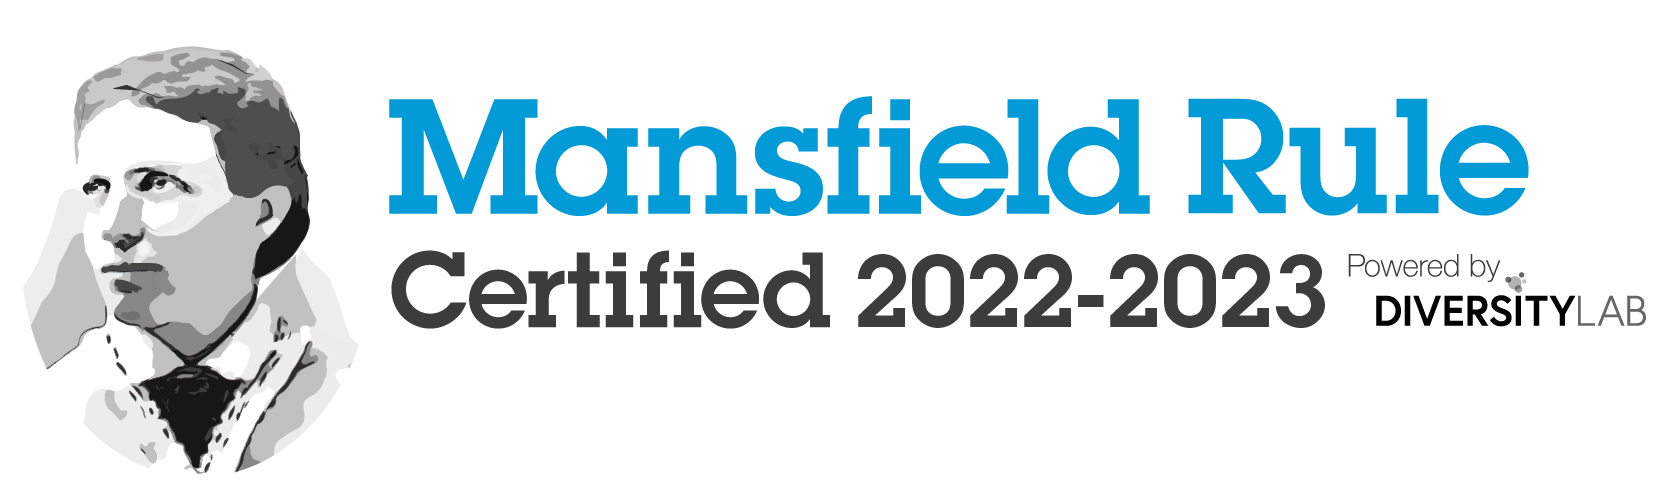 Mansfield Rule Certified 2022-2023 badge, powered by Diversity Lab. The badge features a grayscale illustration of Arabella Mansfield, the first female lawyer in the United States, next to the certification text in blue and black.